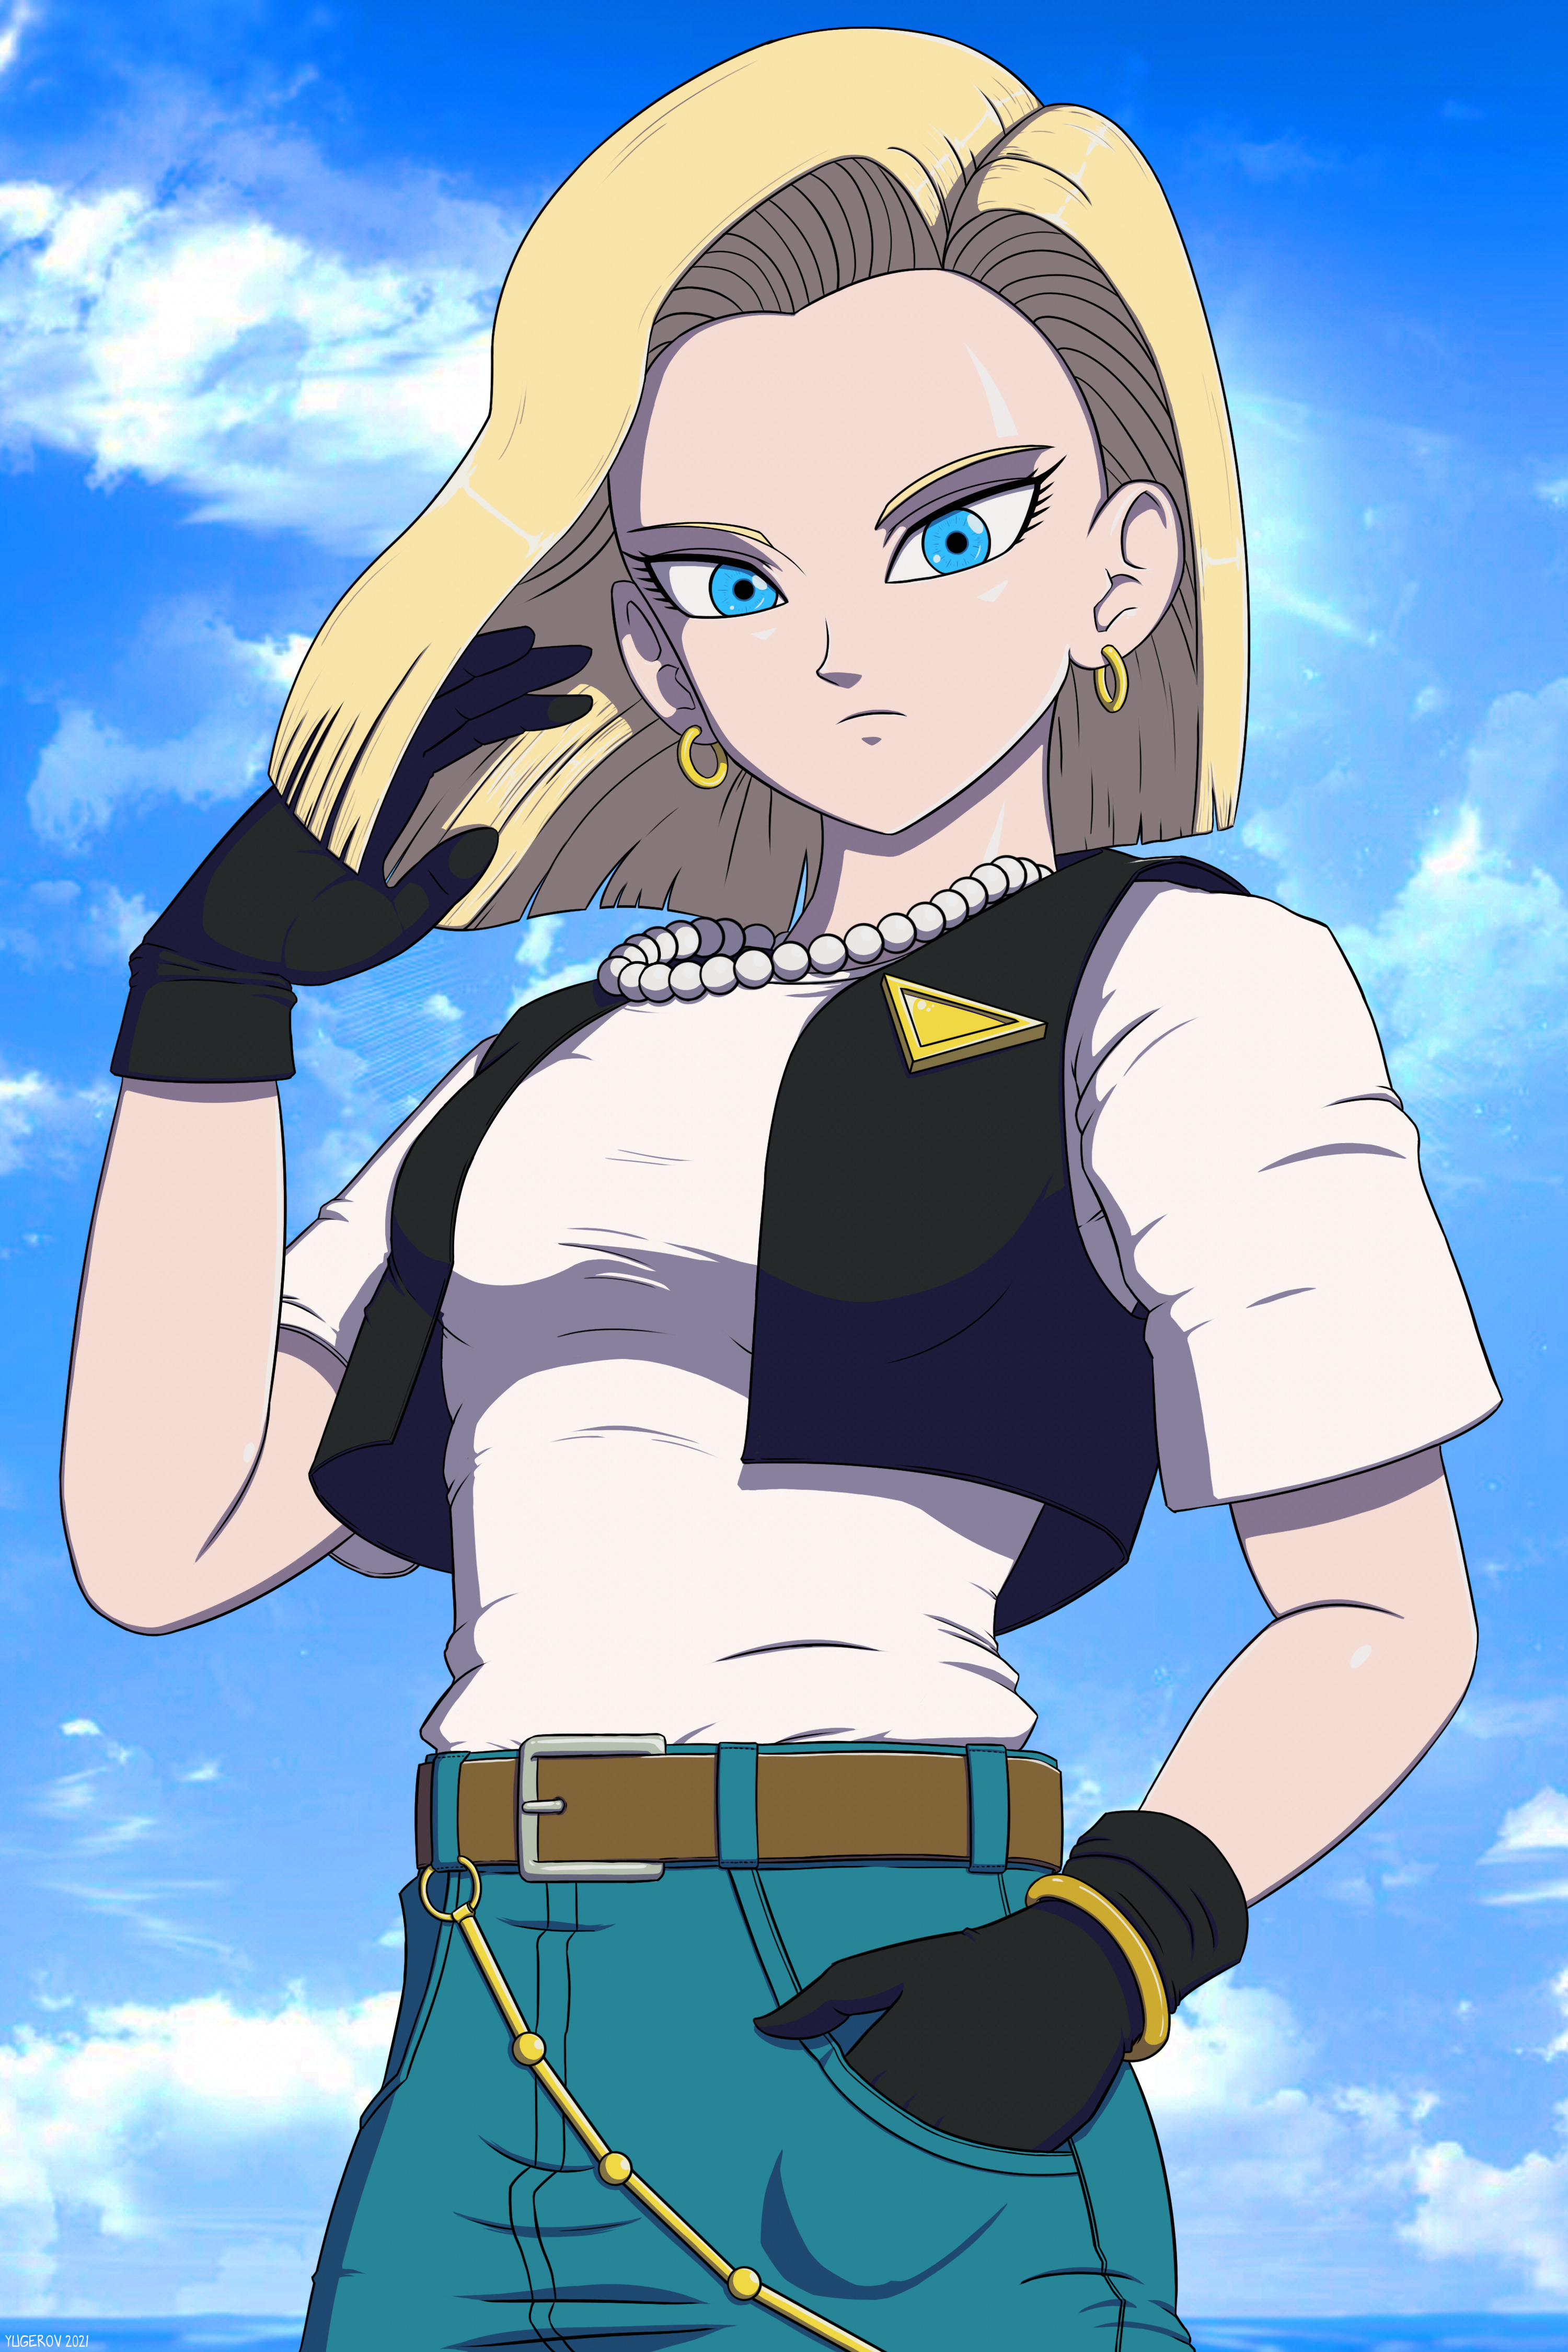 Android 18 Illustration. by Yugerov on